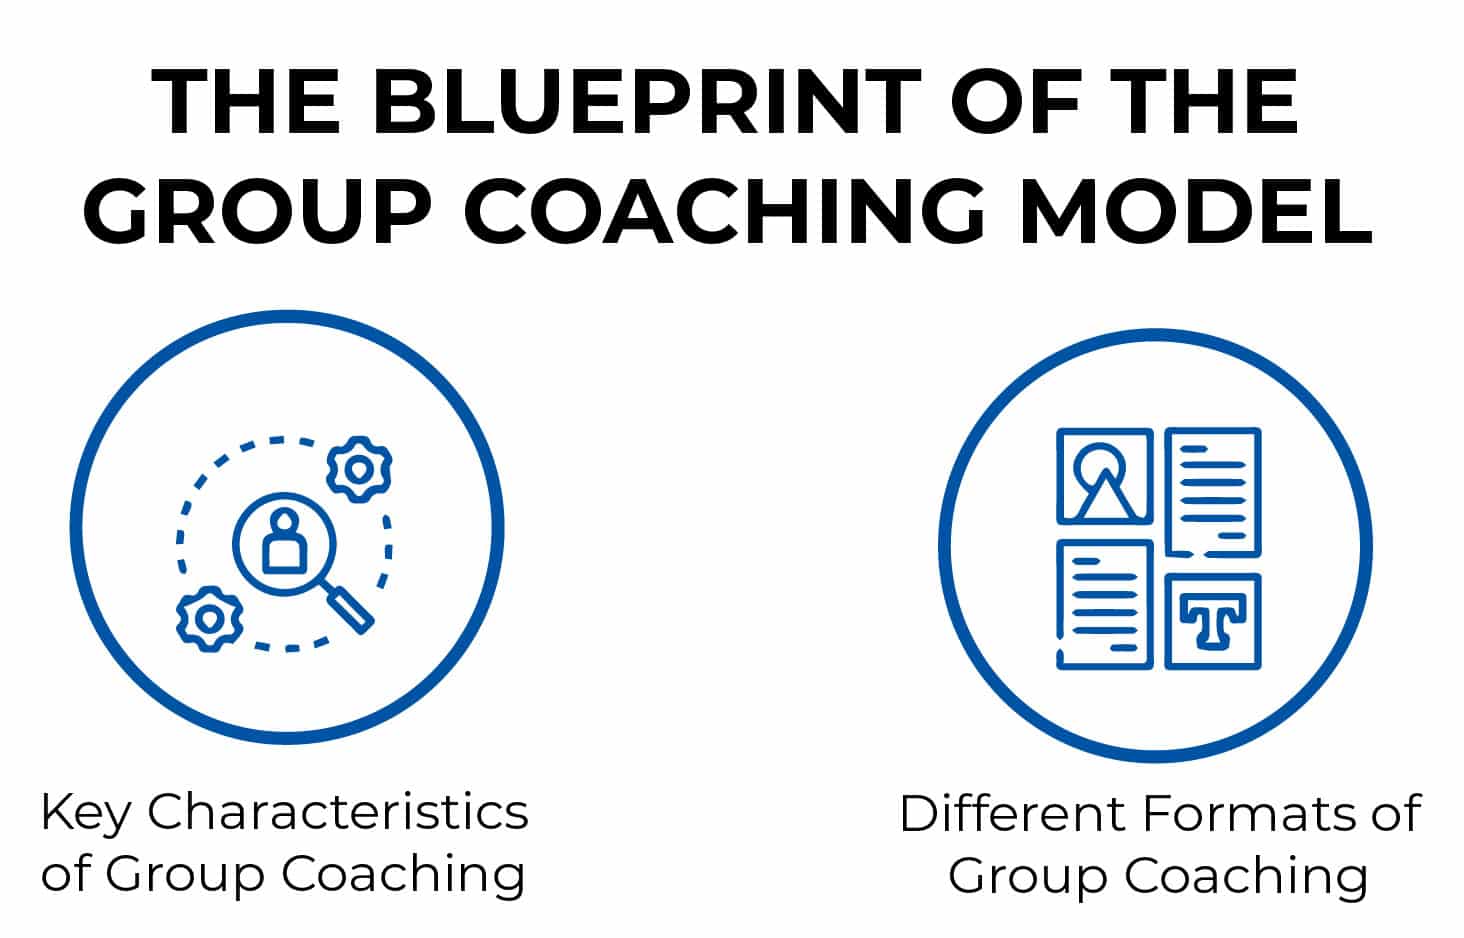 THE BLUEPRINT OF THE GROUP COAHING MODEL